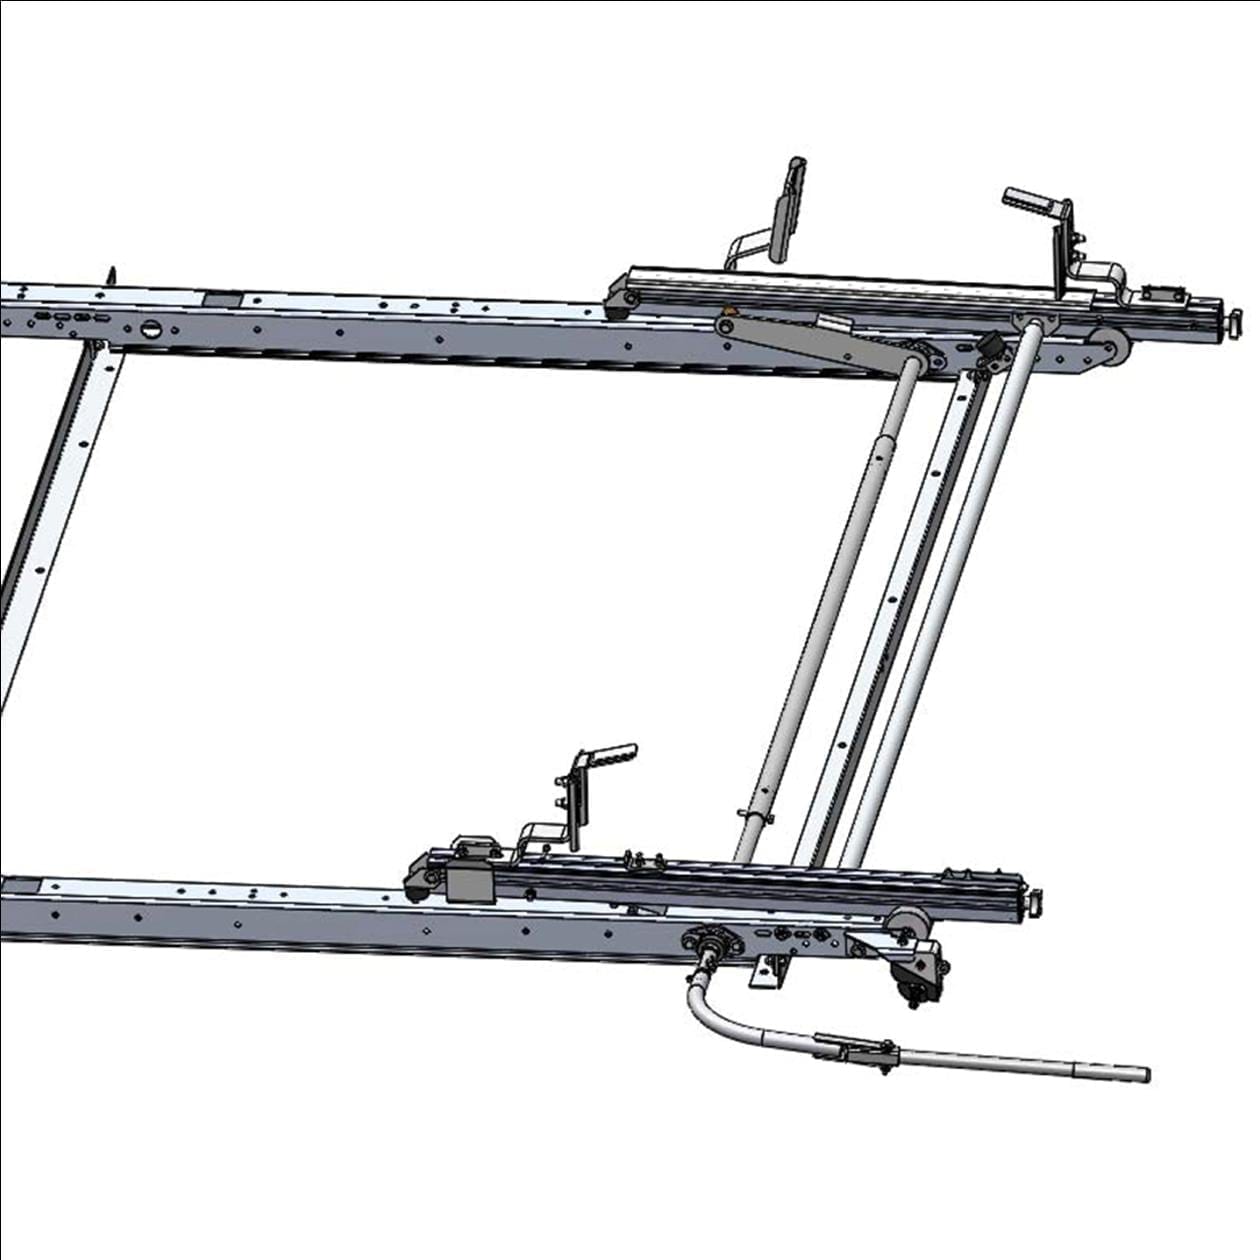 Adrian Steel Double Drop-Down Ladder Rack for Ford Transit | U.S. Upfitters Adrian Steel Drop Down Ladder Rack Parts